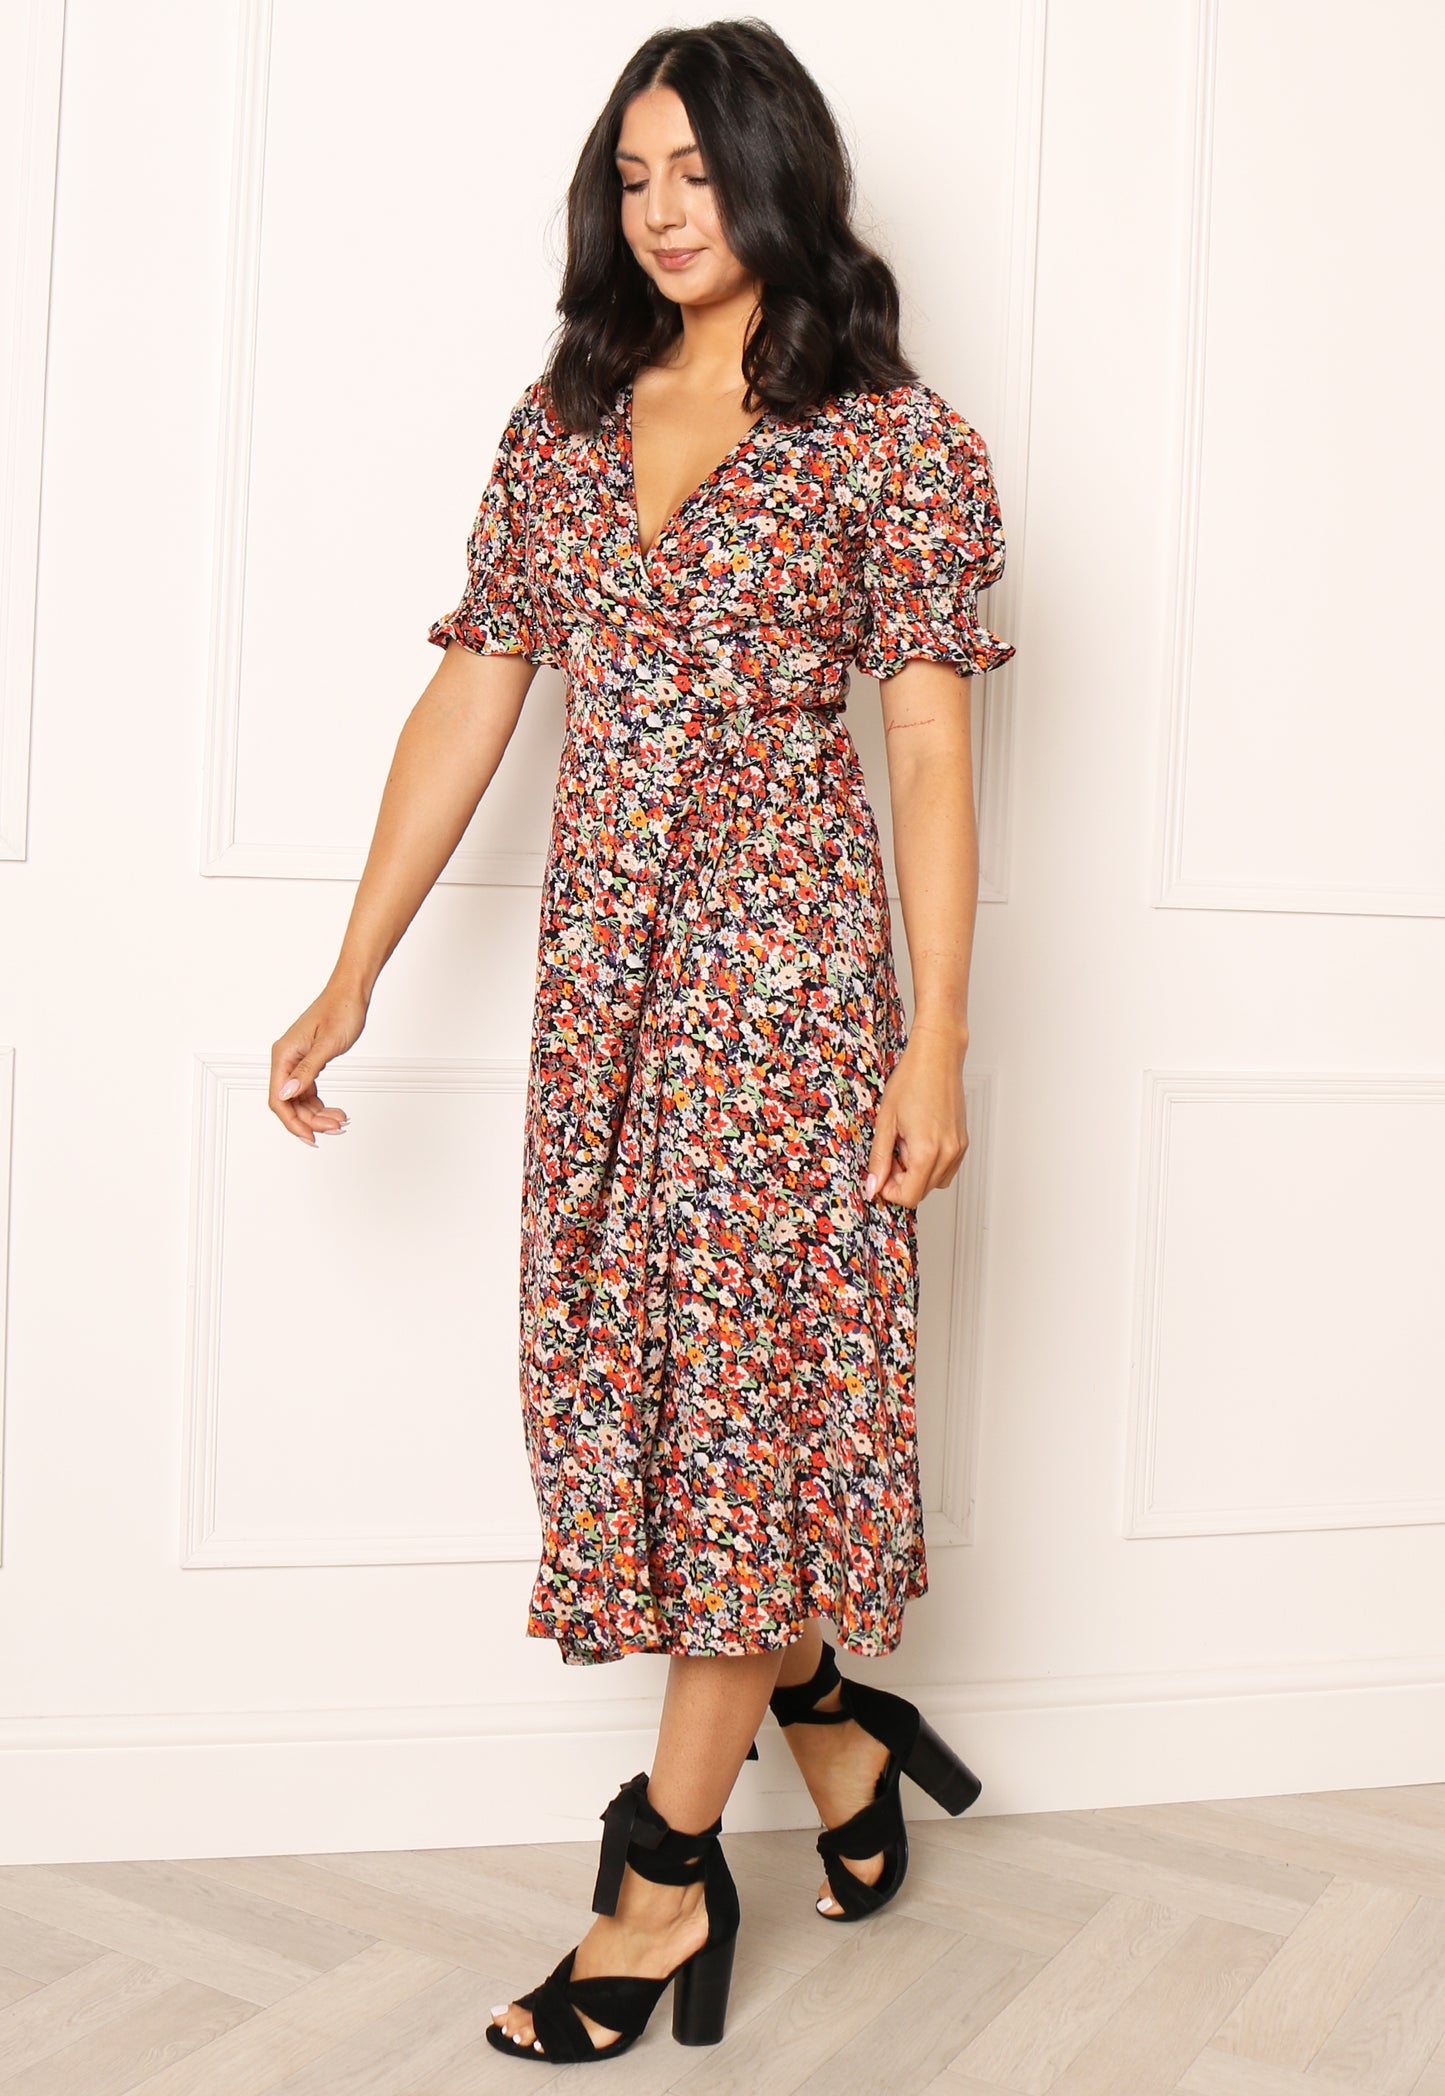 PIECES Nika Ditsy Floral Print Midi Wrap Dress in Red, Orange & Black - One Nation Clothing